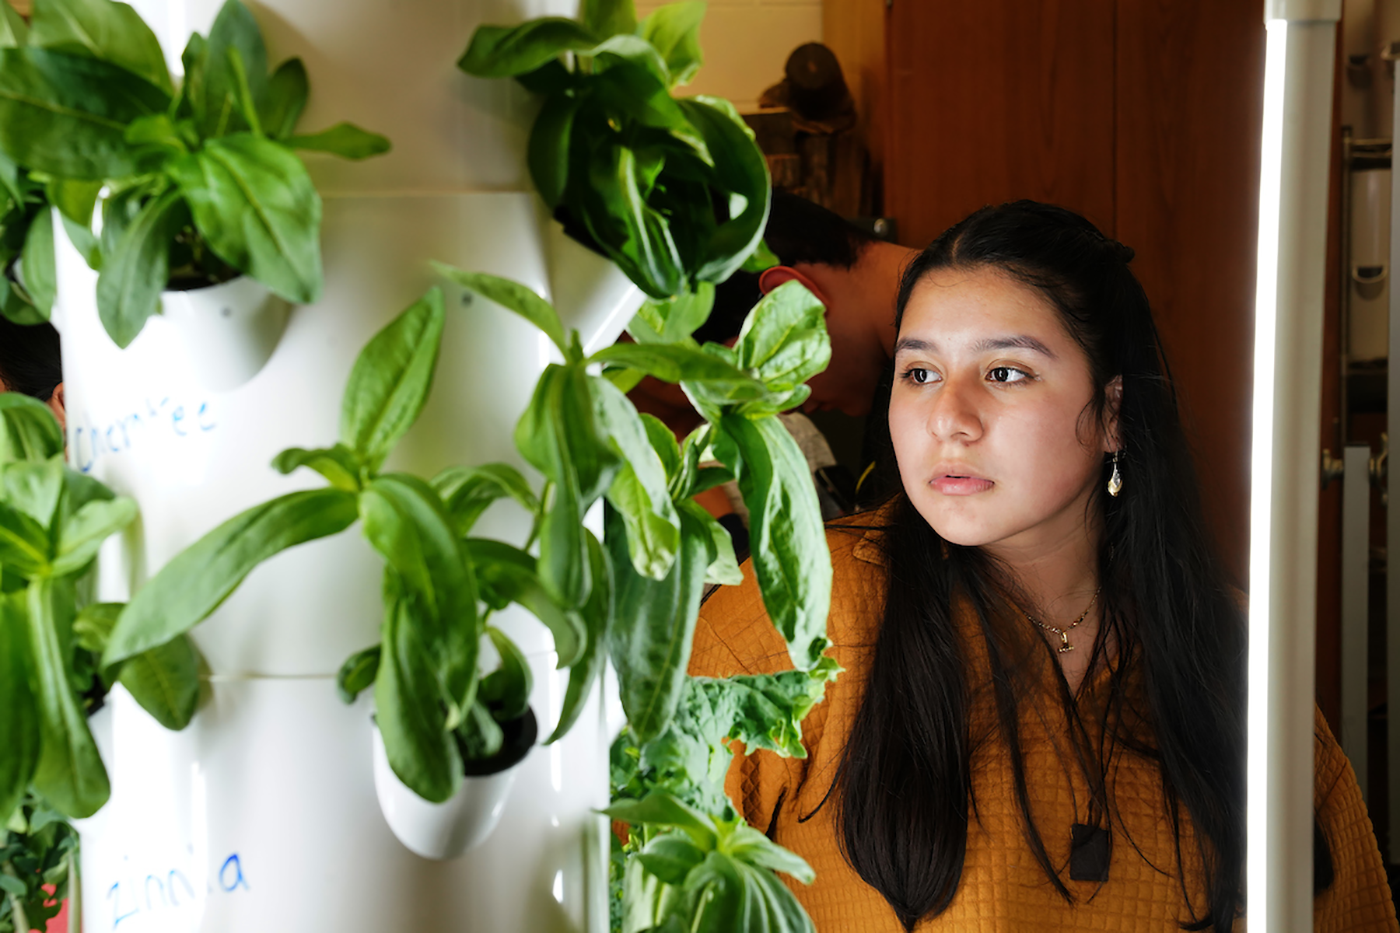 Teenage girl stares intently at aeroponic grow tower with green leafy greens growing out of multiple holes.